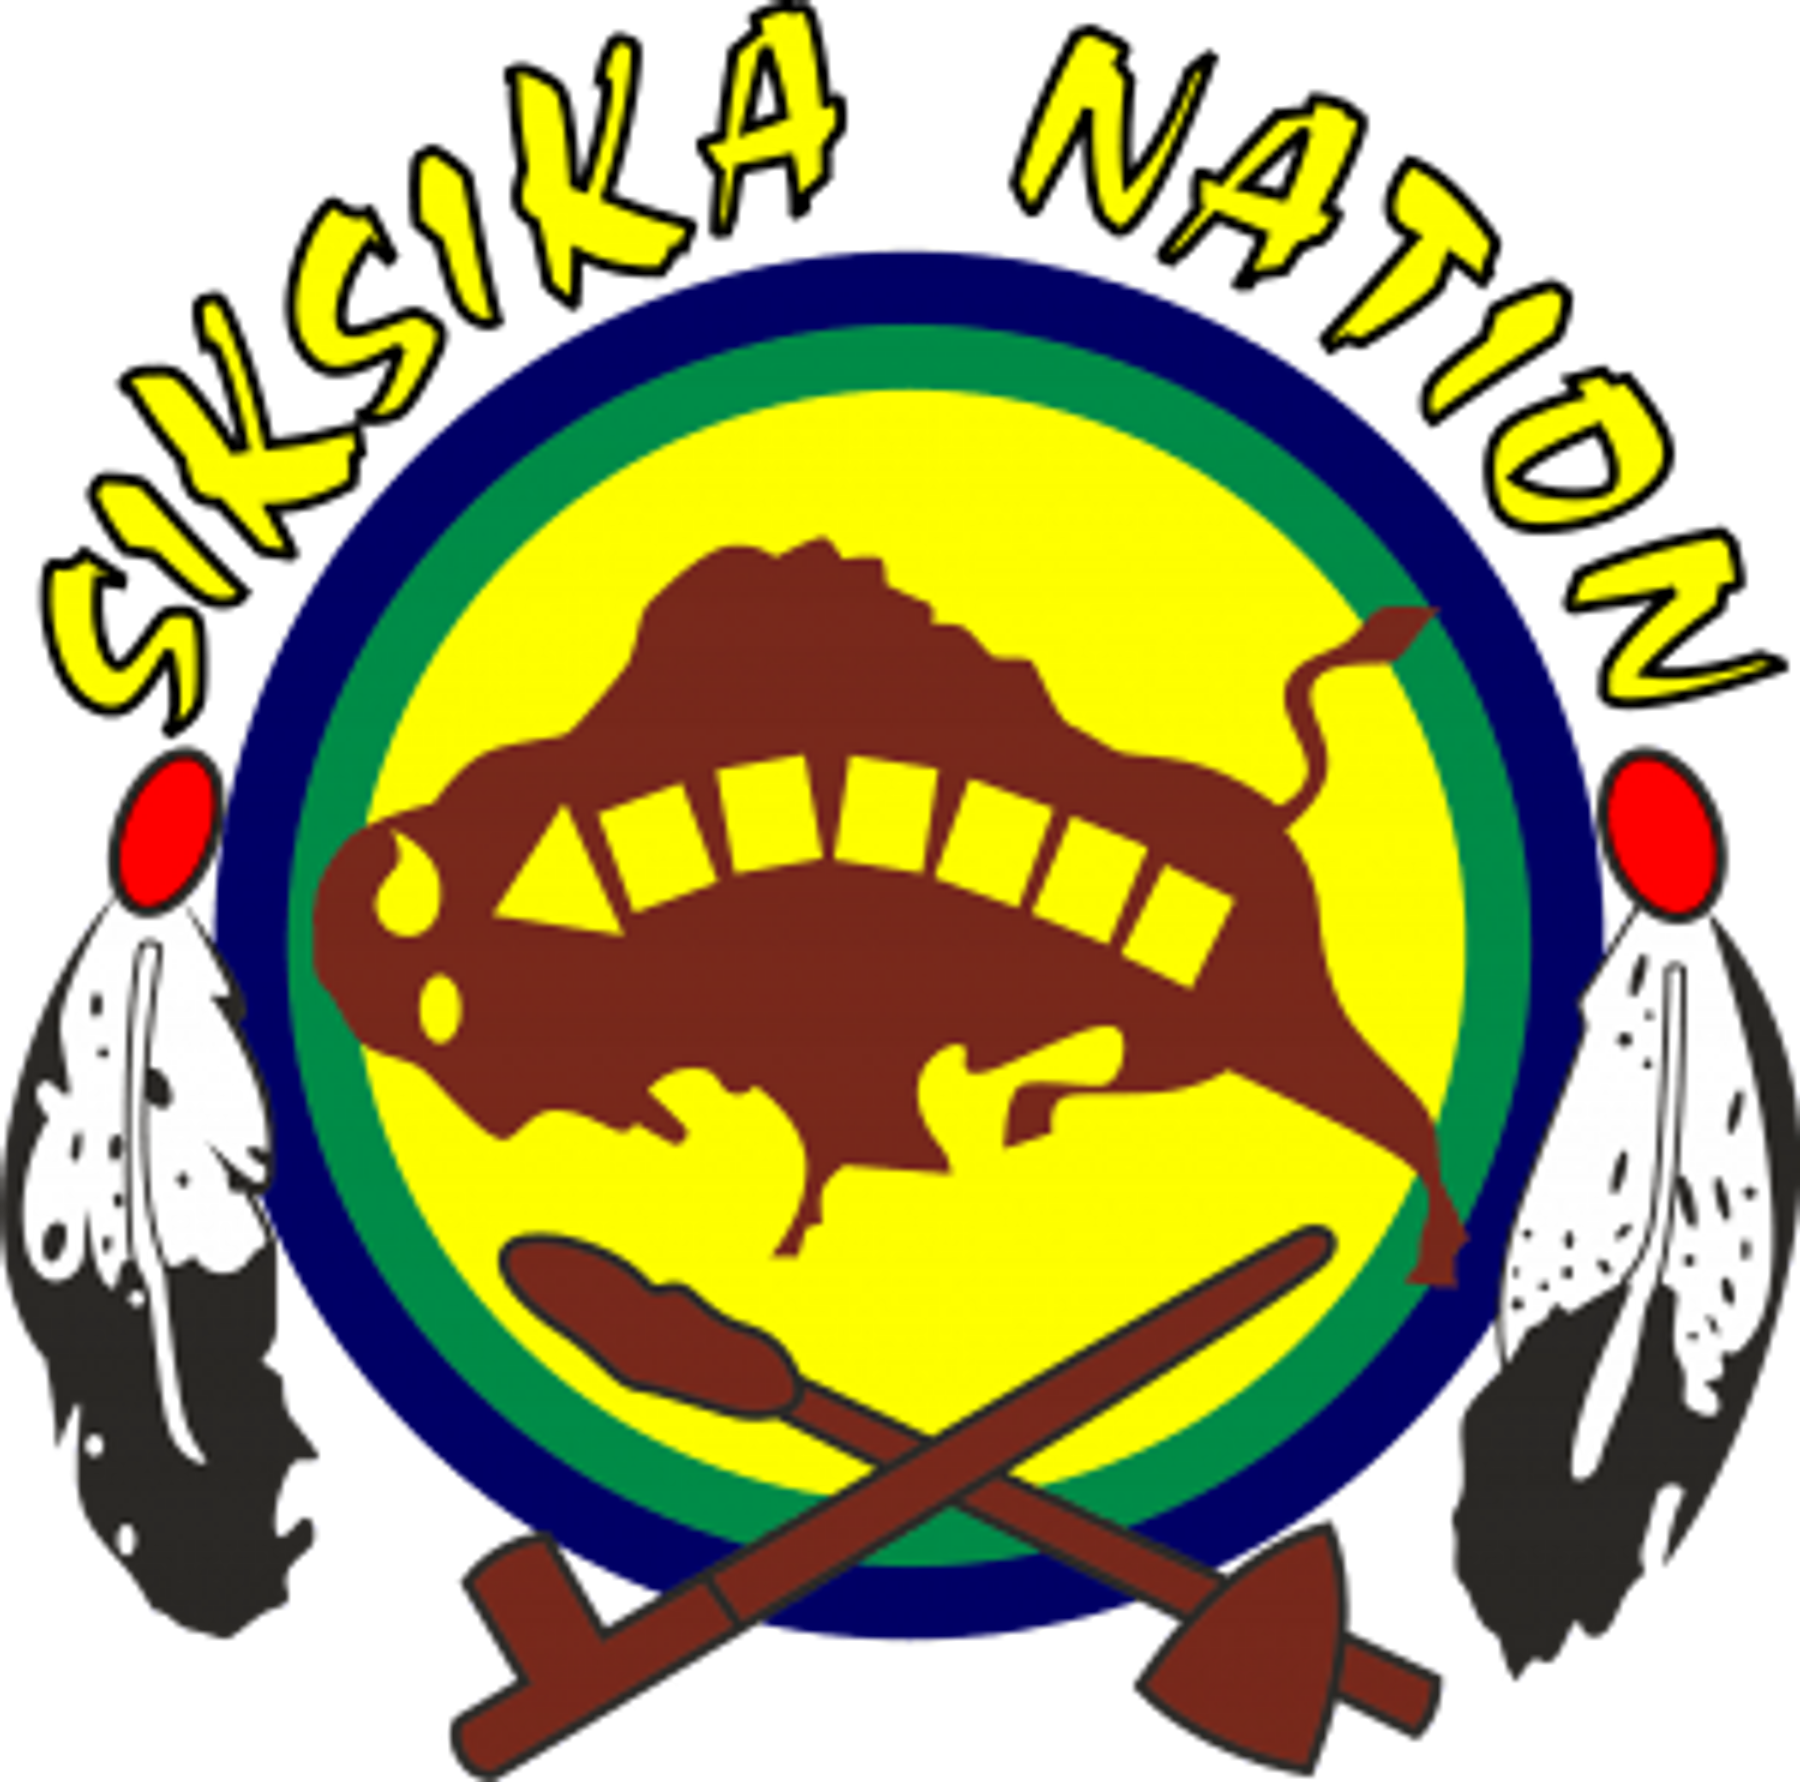 Logo for Siksika nation, displaying a bison with arrows inside it, surrounded by a colorful circle and the text 'Siksika Nation'